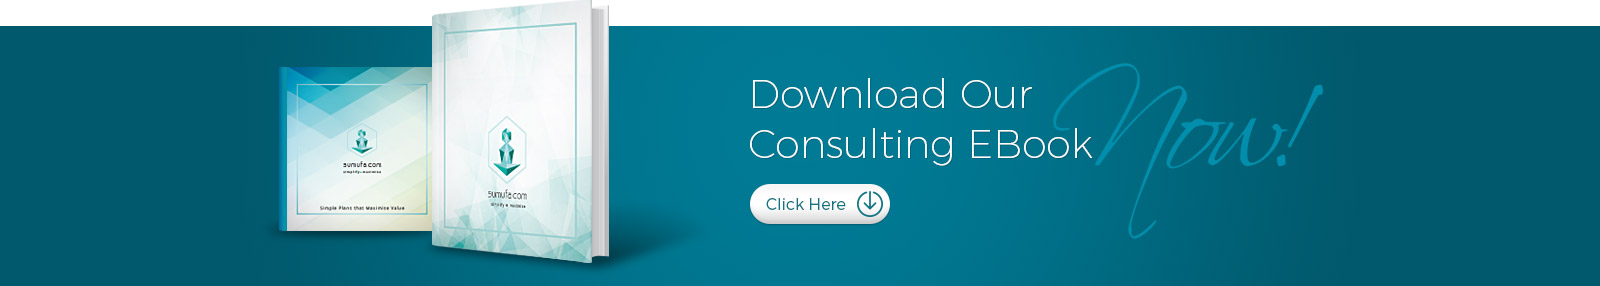 Download Our Consulting EBook